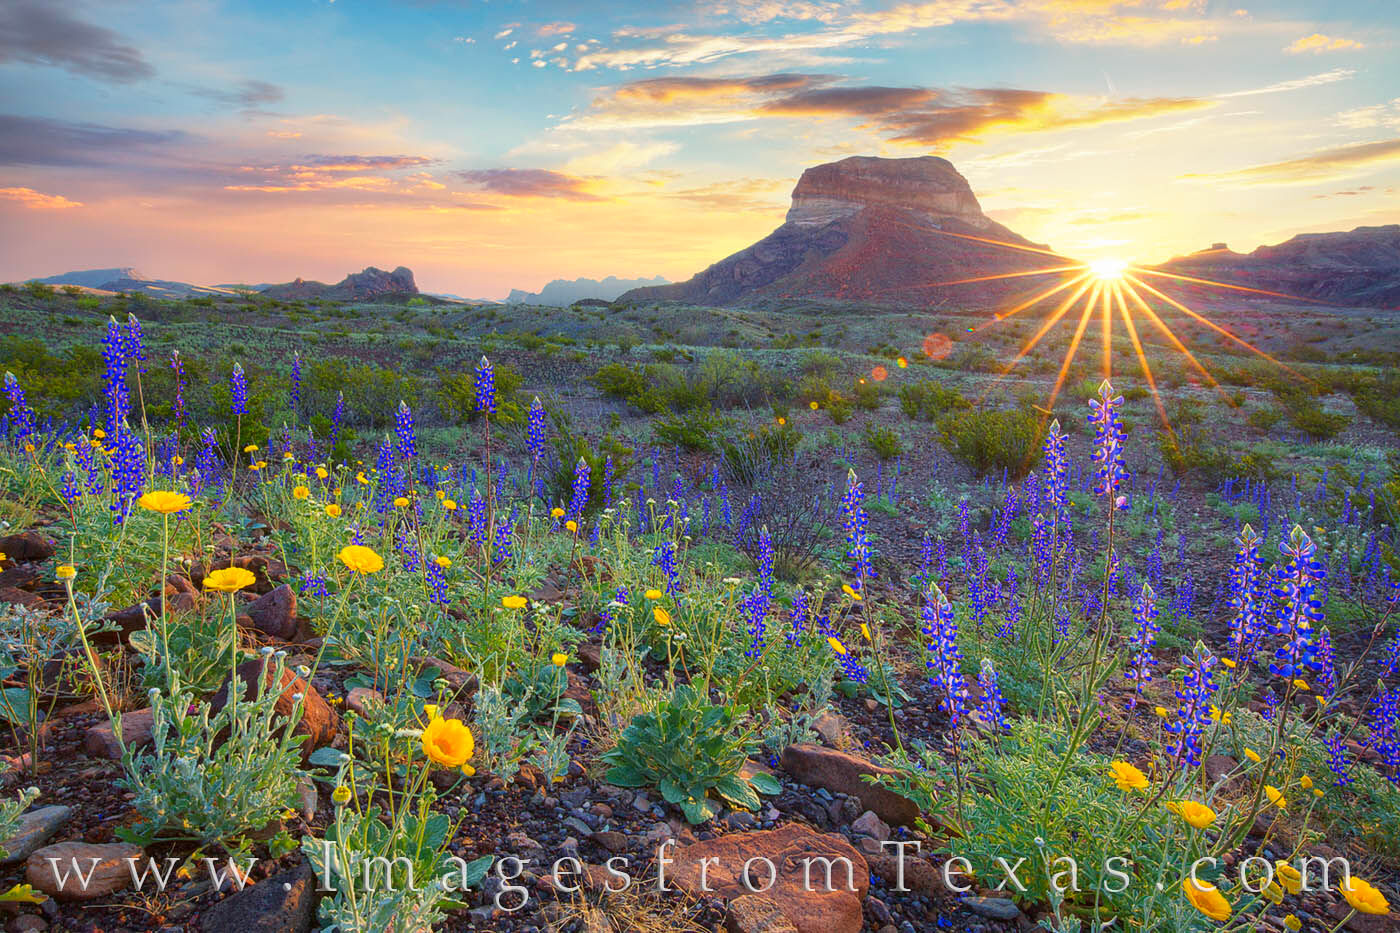 Bluebonnets bathe in the warmth of first light as the sun rises over a ridge of Cerro Castellan in Big Bend National park.